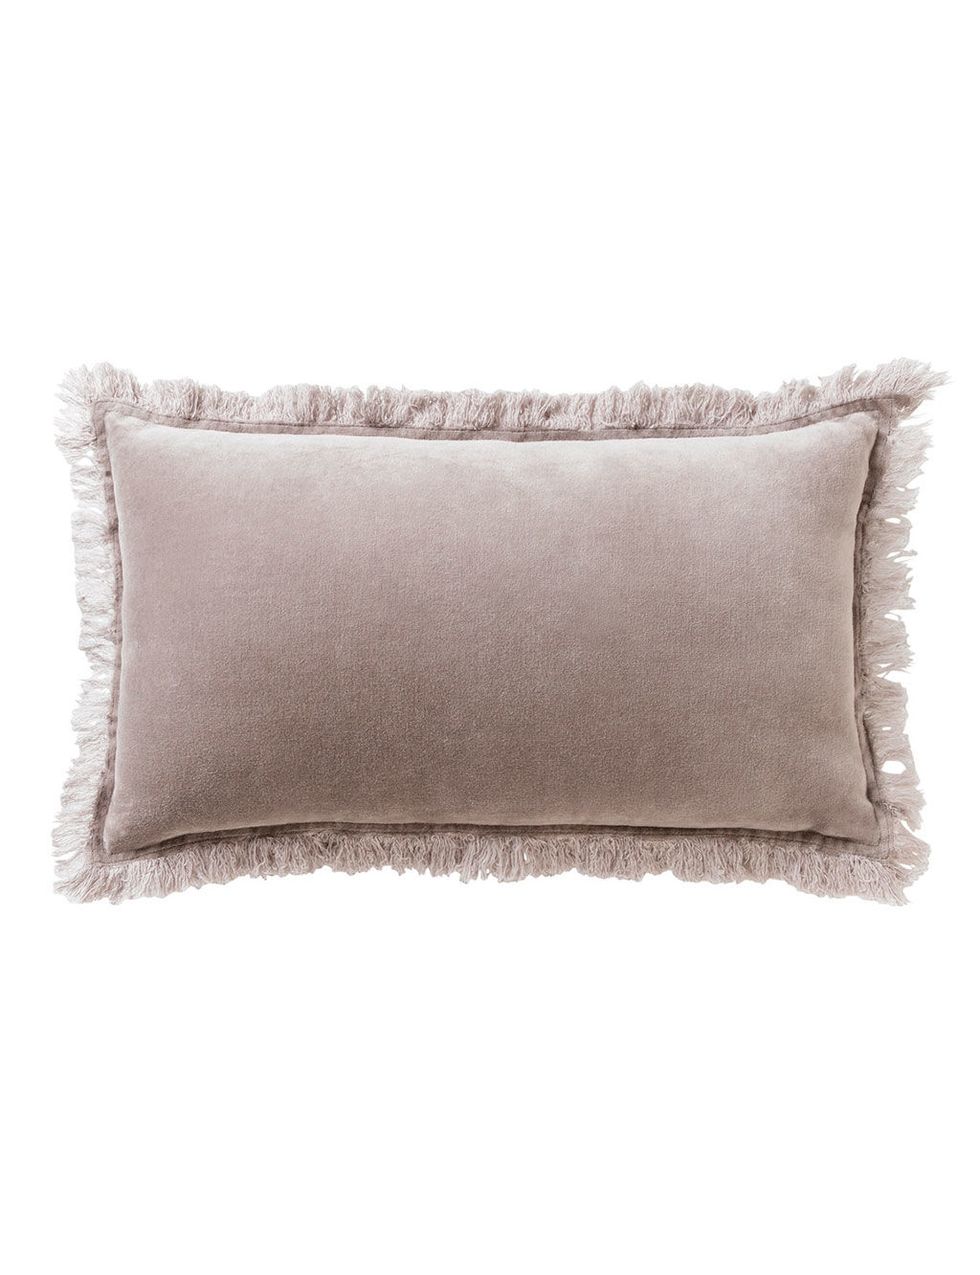 Brown, Textile, Cushion, Rectangle, Tan, Beige, Home accessories, Linens, Leather, Pillow, 